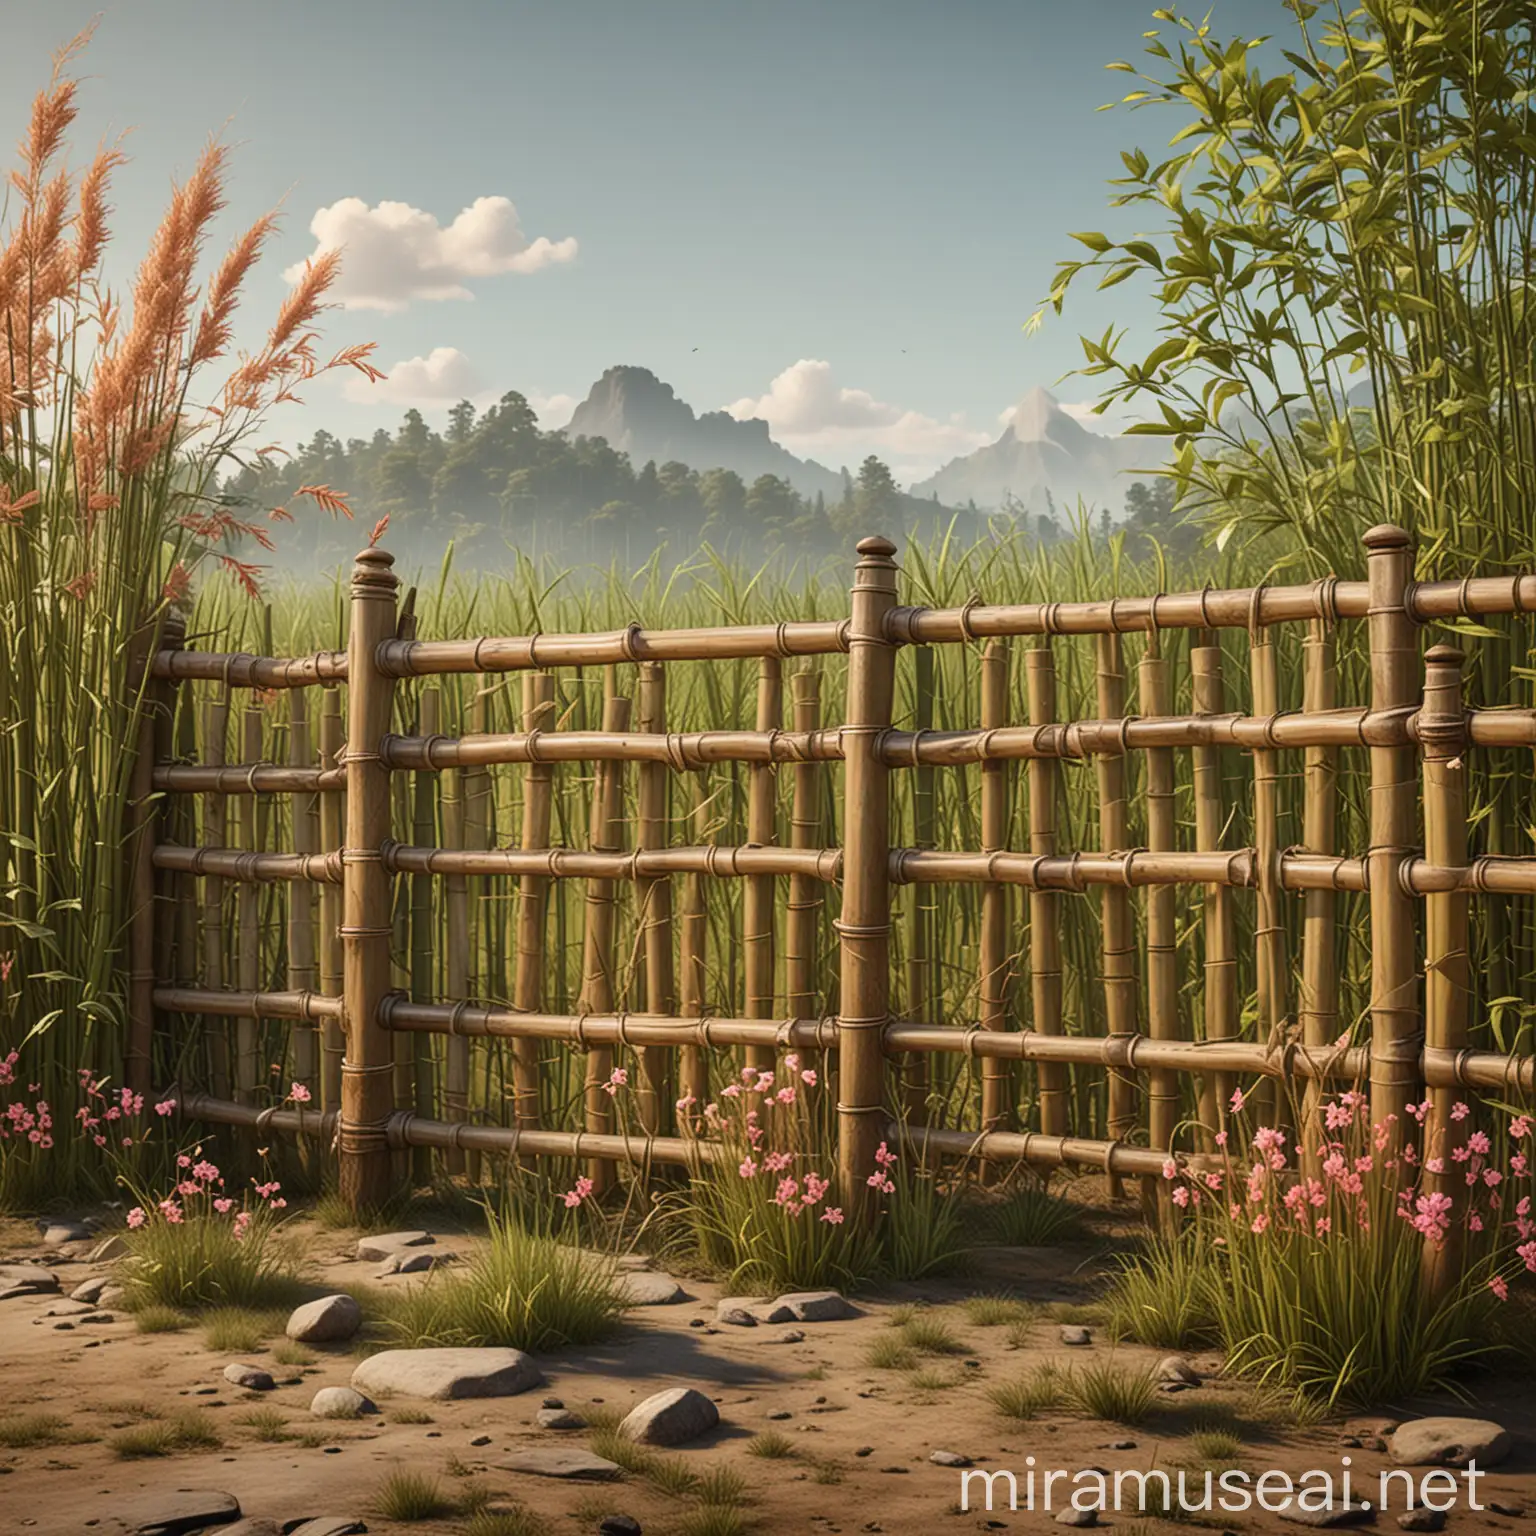 Realistic Bamboo Fence Asset for Parallax View Environment